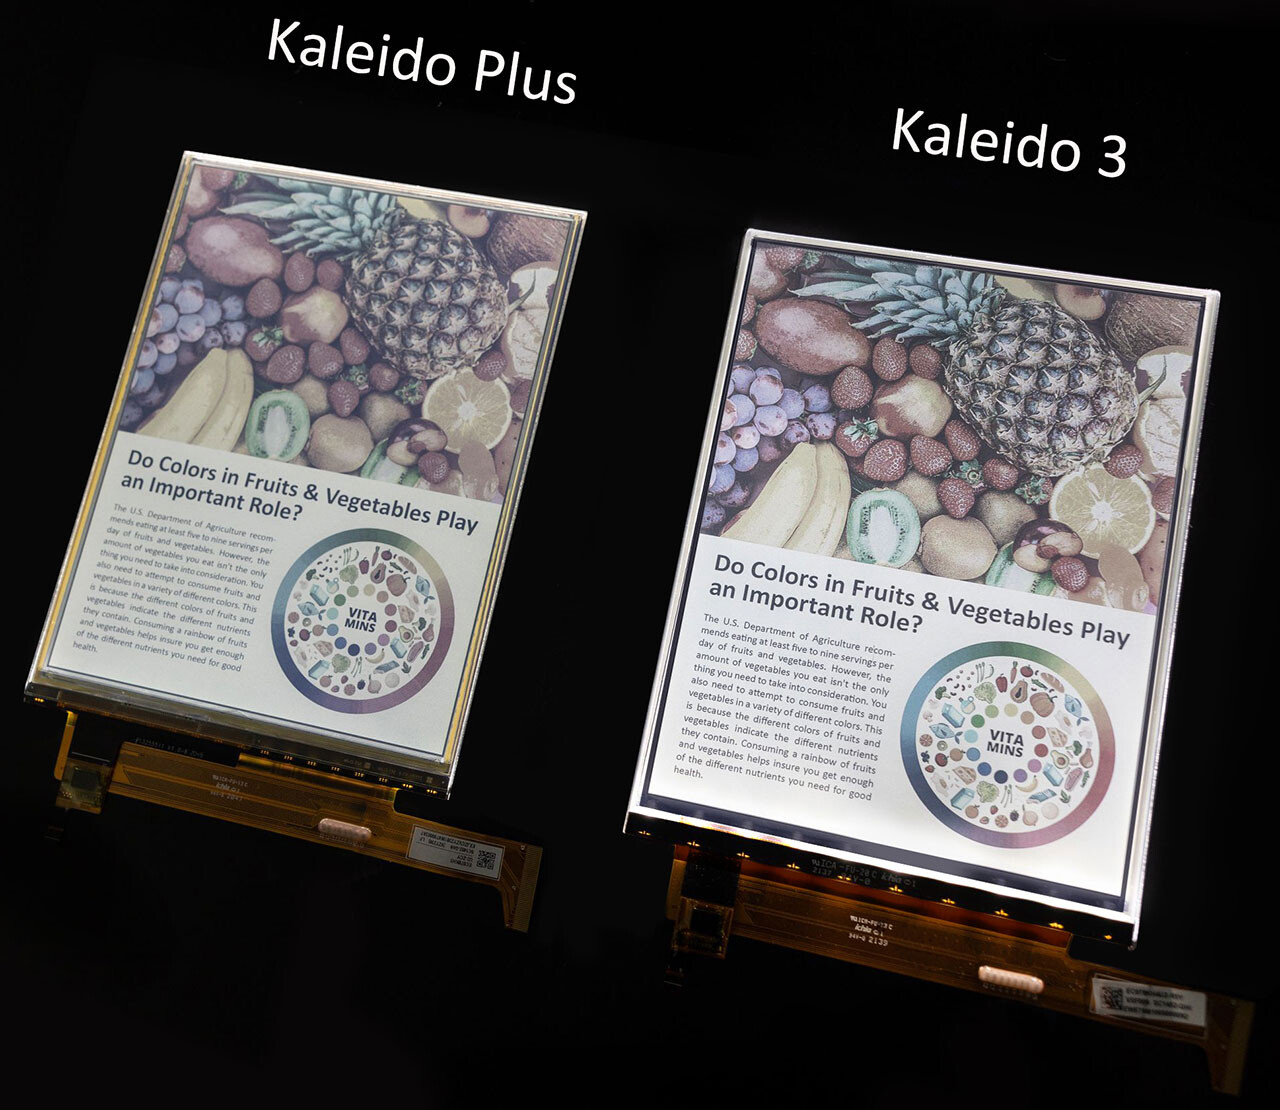 E Ink Launches E Ink Kaleido 3, the Next Generation of Print Color ePaper Technology